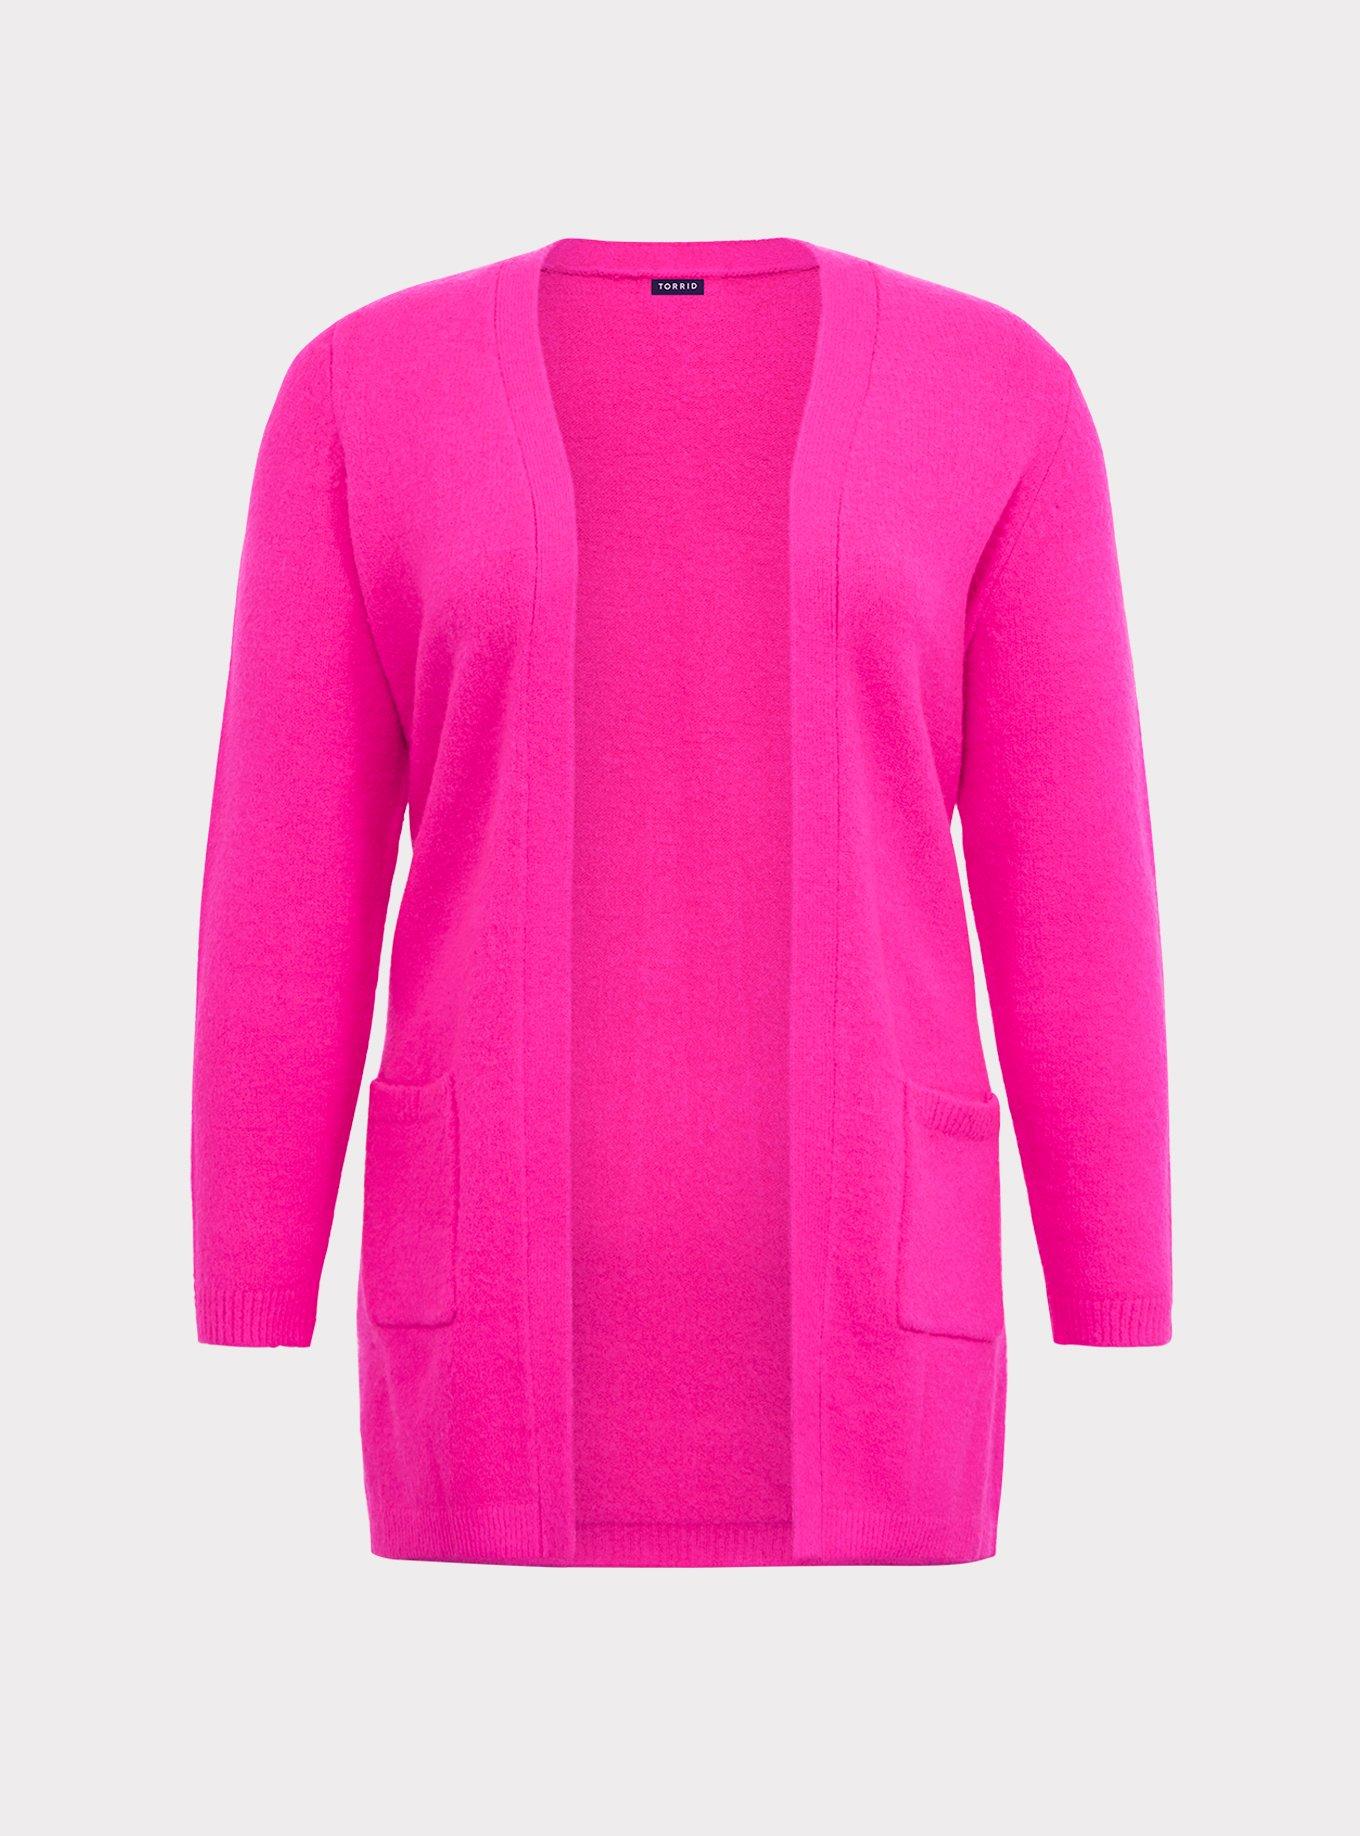 Slinky Brand hot pink open cardigan, size L, NWT, India